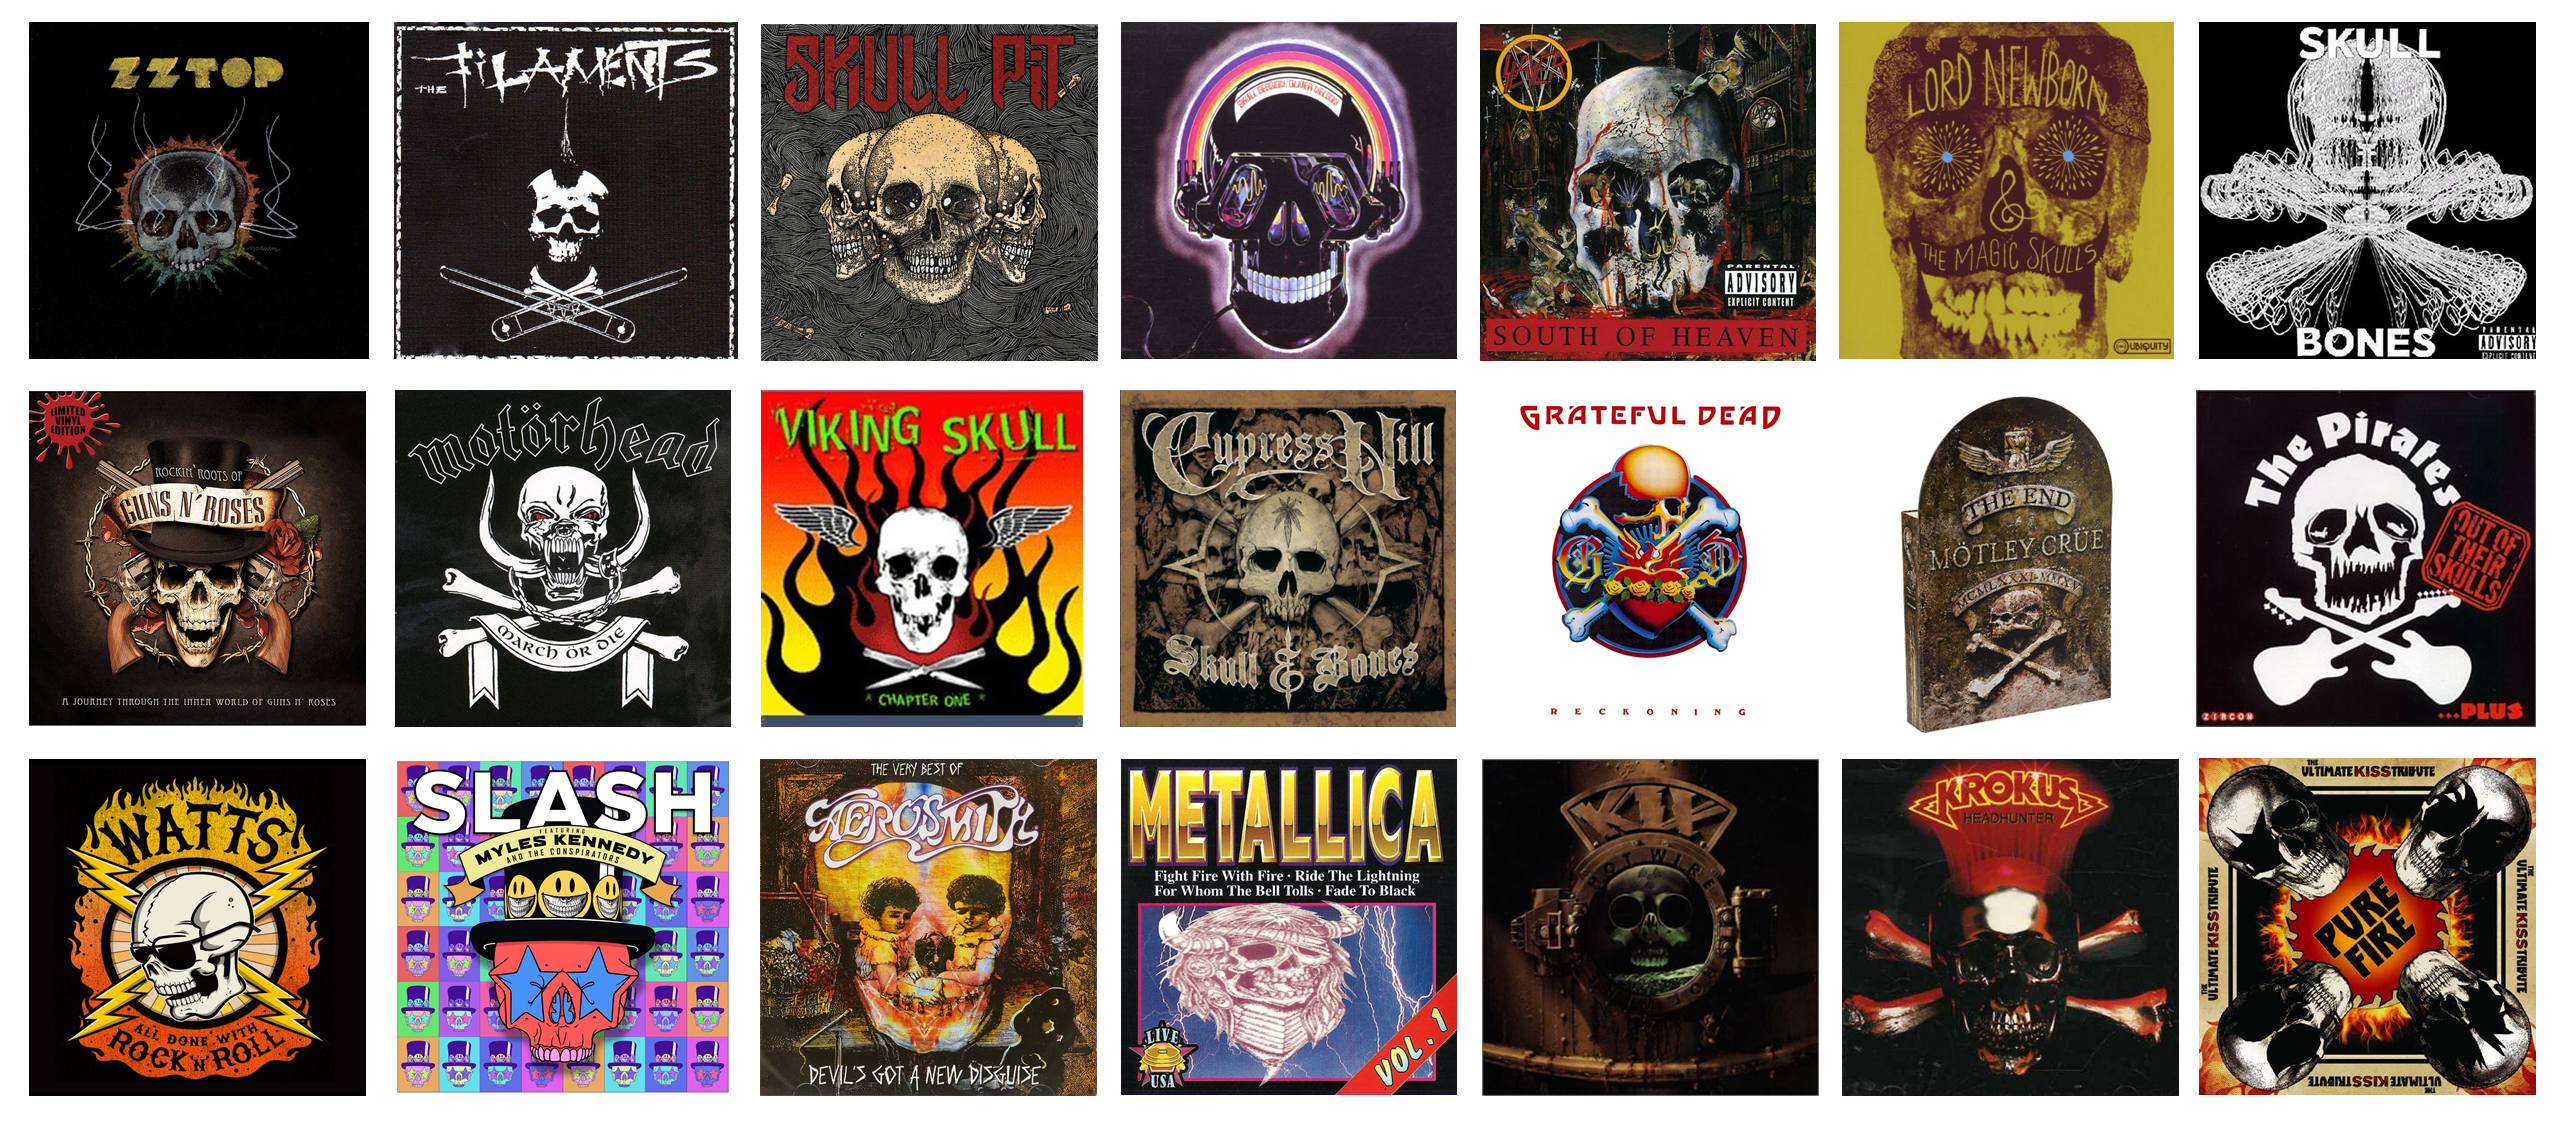 tamed winds t-shirt shop and blog, mosaic picture of music album covers featuring skull and bones